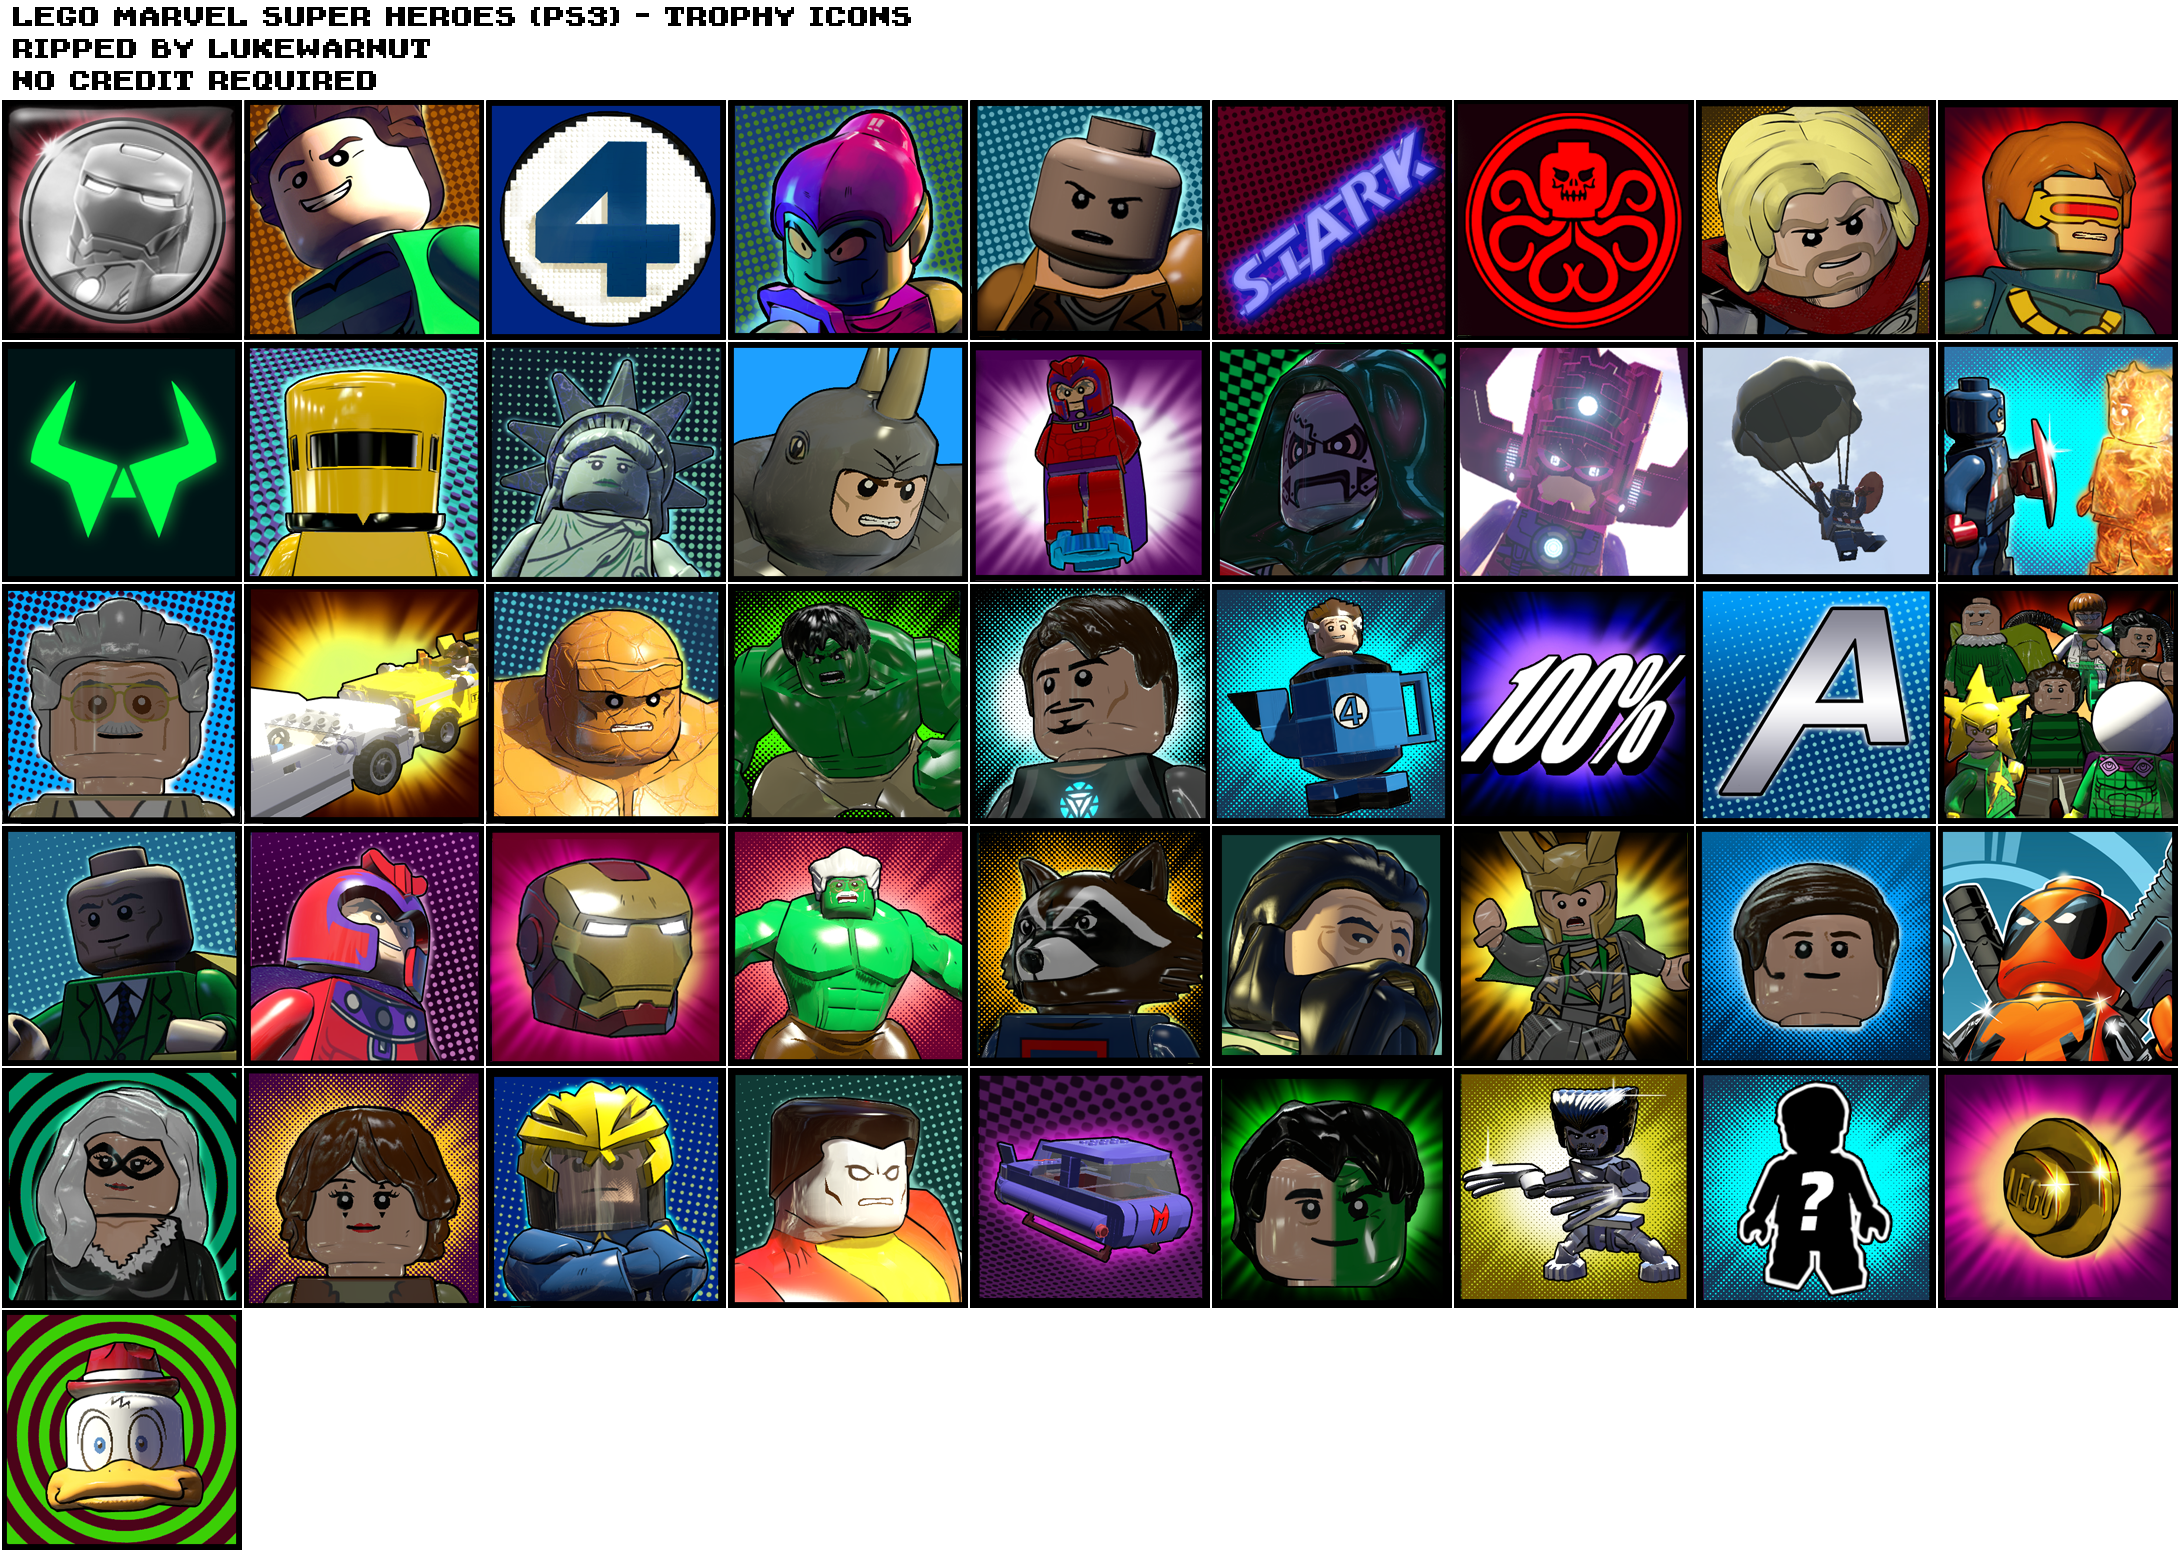 PS3 Trophy Icons